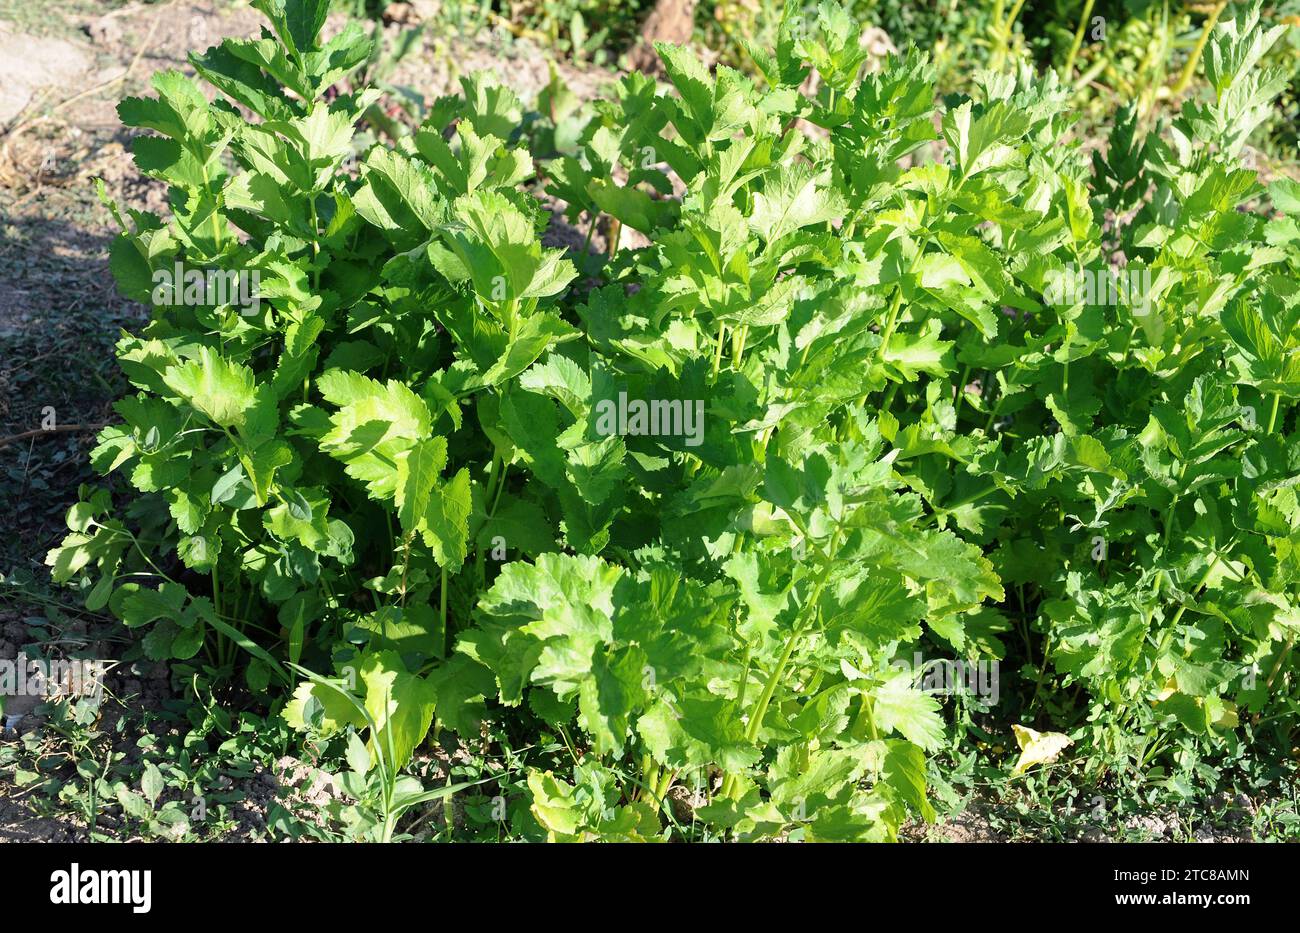 Parsnip (Pastinaca sativa) is an annual or biennial herb cultivated for its edible roots. Stock Photo